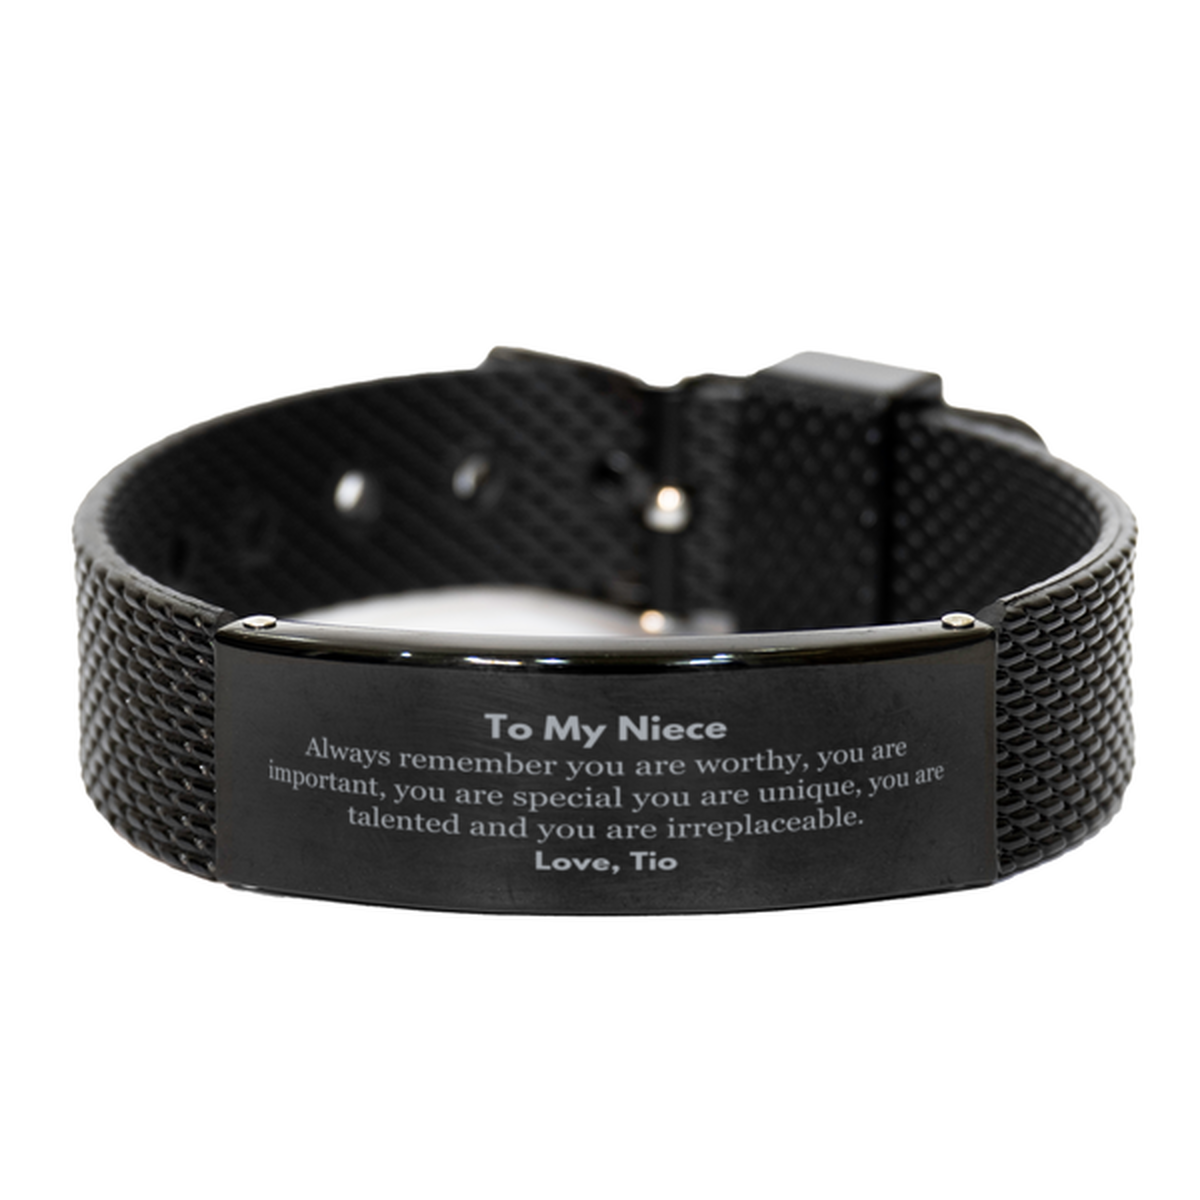 Niece Birthday Gifts from Tio, Inspirational Black Shark Mesh Bracelet for Niece Christmas Graduation Gifts for Niece Always remember you are worthy, you are important. Love, Tio